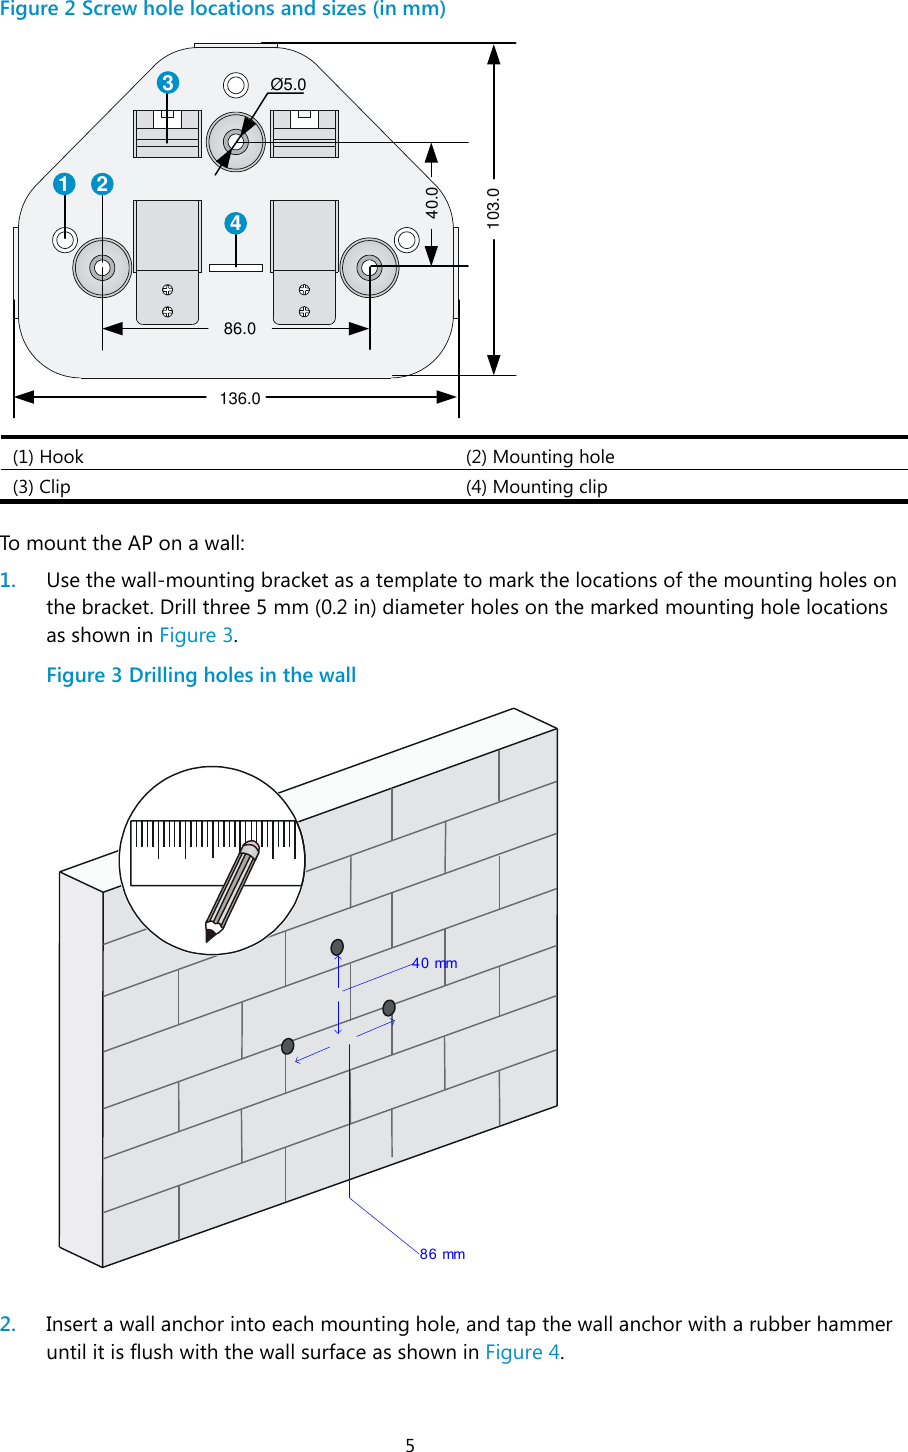  5 Figure 2 Screw hole locations and sizes (in mm)  (1) Hook (2) Mounting hole (3) Clip (4) Mounting clip  To mount the AP on a wall: 1. Use the wall-mounting bracket as a template to mark the locations of the mounting holes on the bracket. Drill three 5 mm (0.2 in) diameter holes on the marked mounting hole locations as shown in Figure 3. Figure 3 Drilling holes in the wall   2. Insert a wall anchor into each mounting hole, and tap the wall anchor with a rubber hammer until it is flush with the wall surface as shown in Figure 4. 1 234Ø5.040.0103.086.0136.040 mm 86 mm